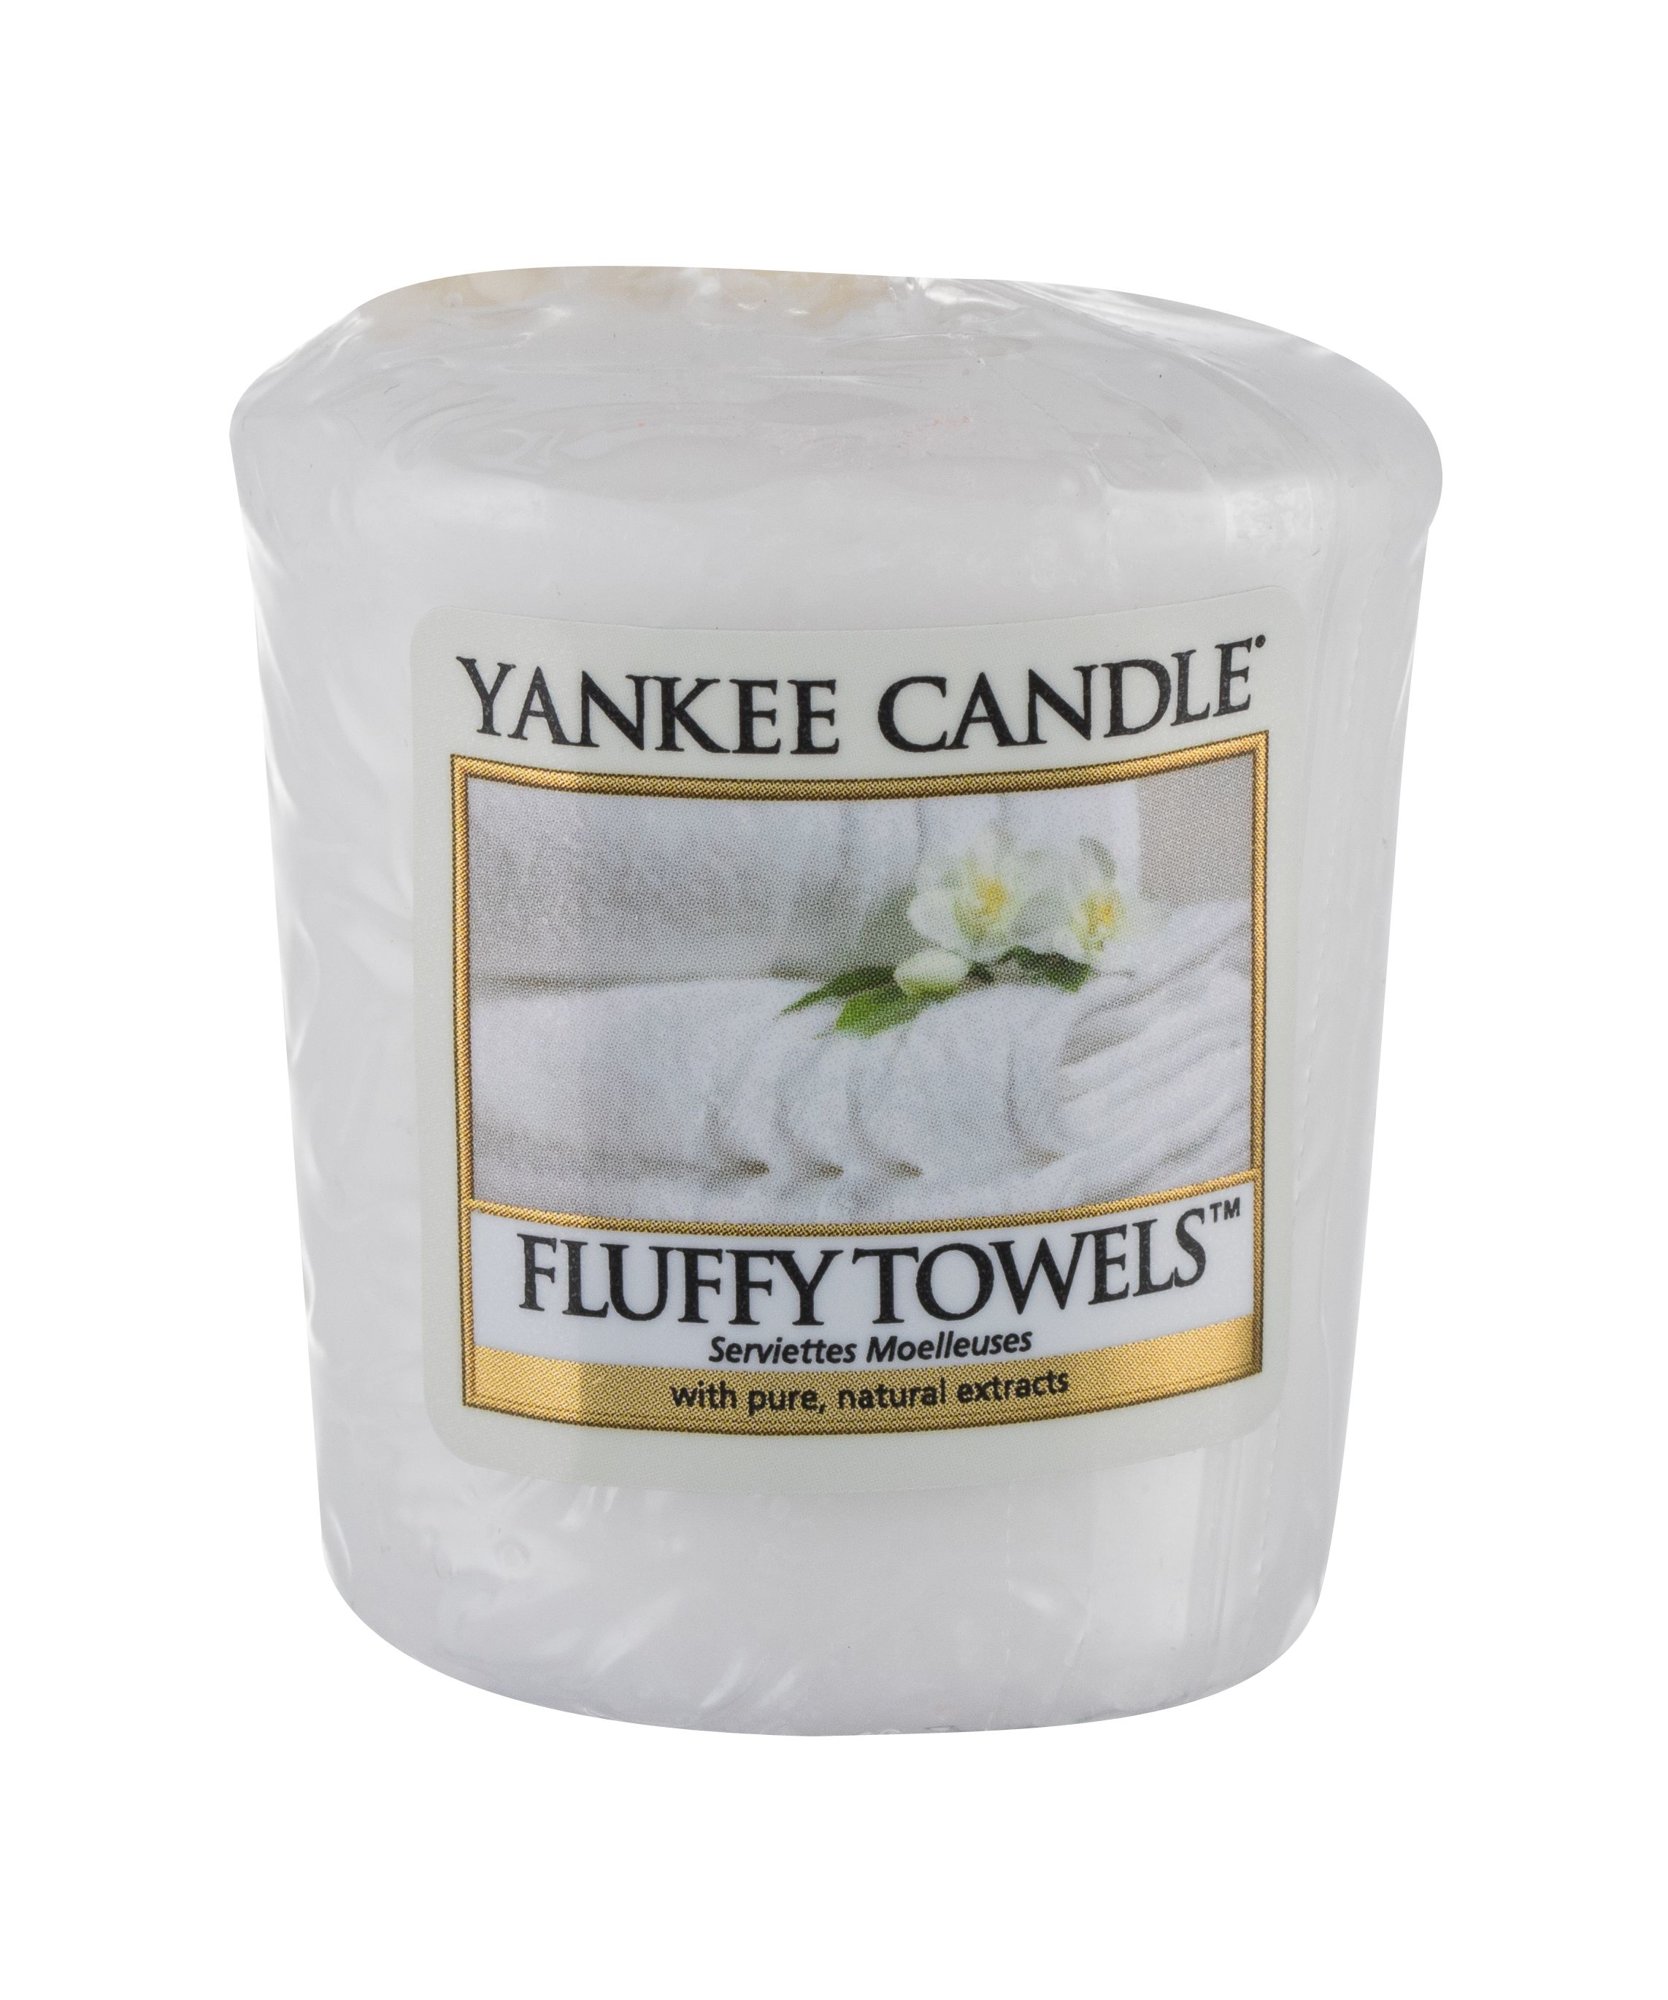 Yankee Candle Fluffy Towels 49g Kvepalai Unisex Scented Candle